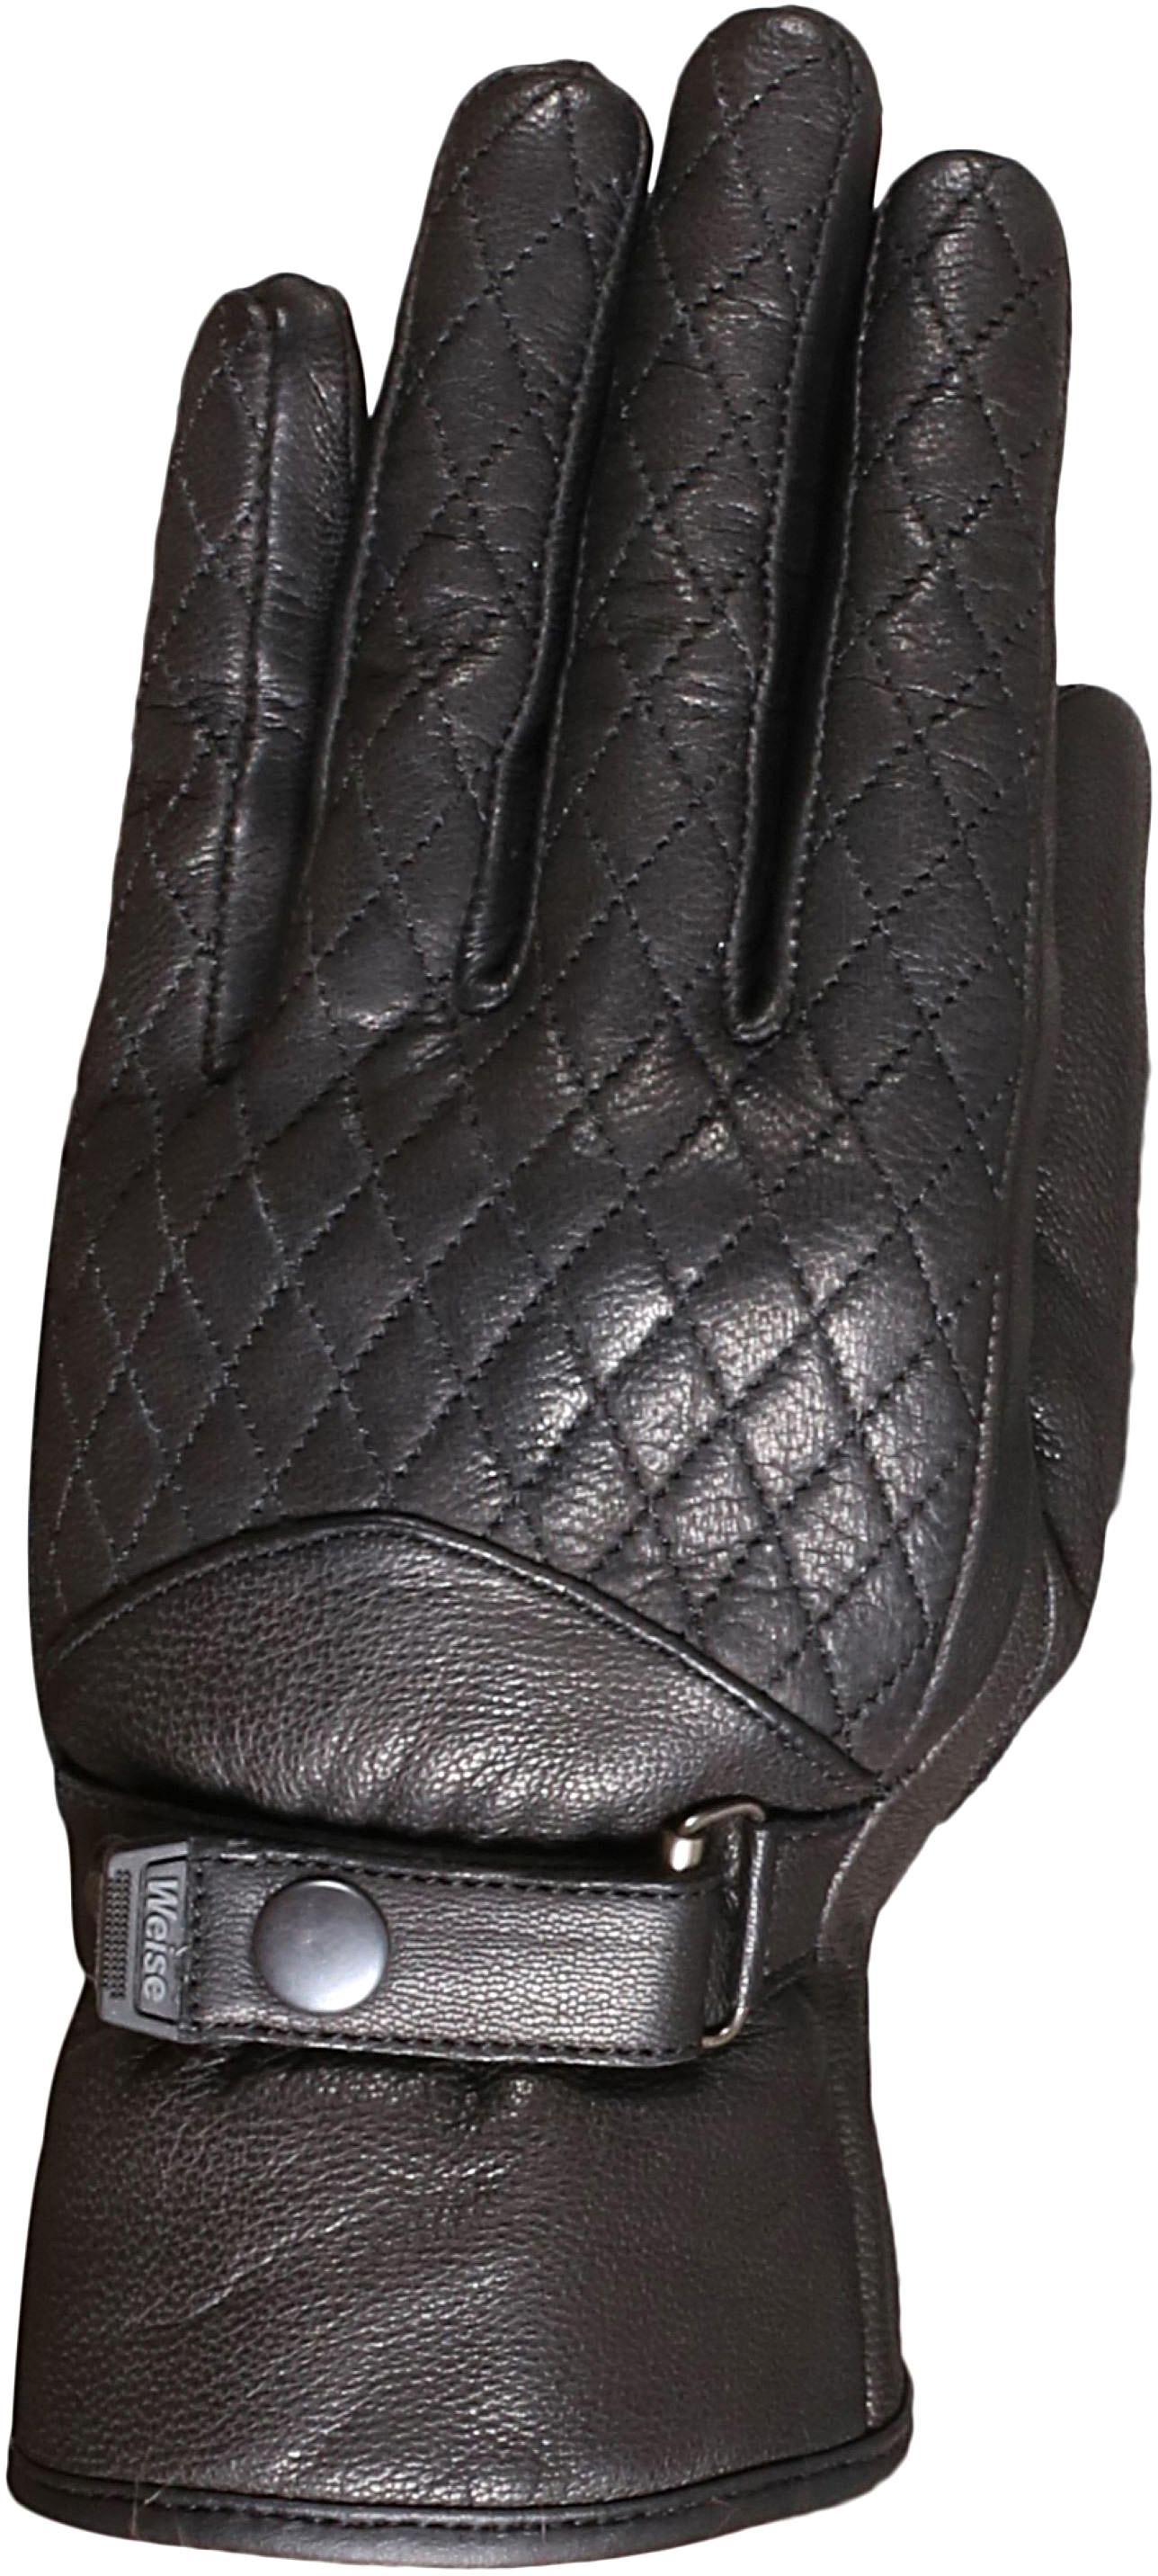 Weise Halo Womens Motorcycle Gloves - Black, Xl